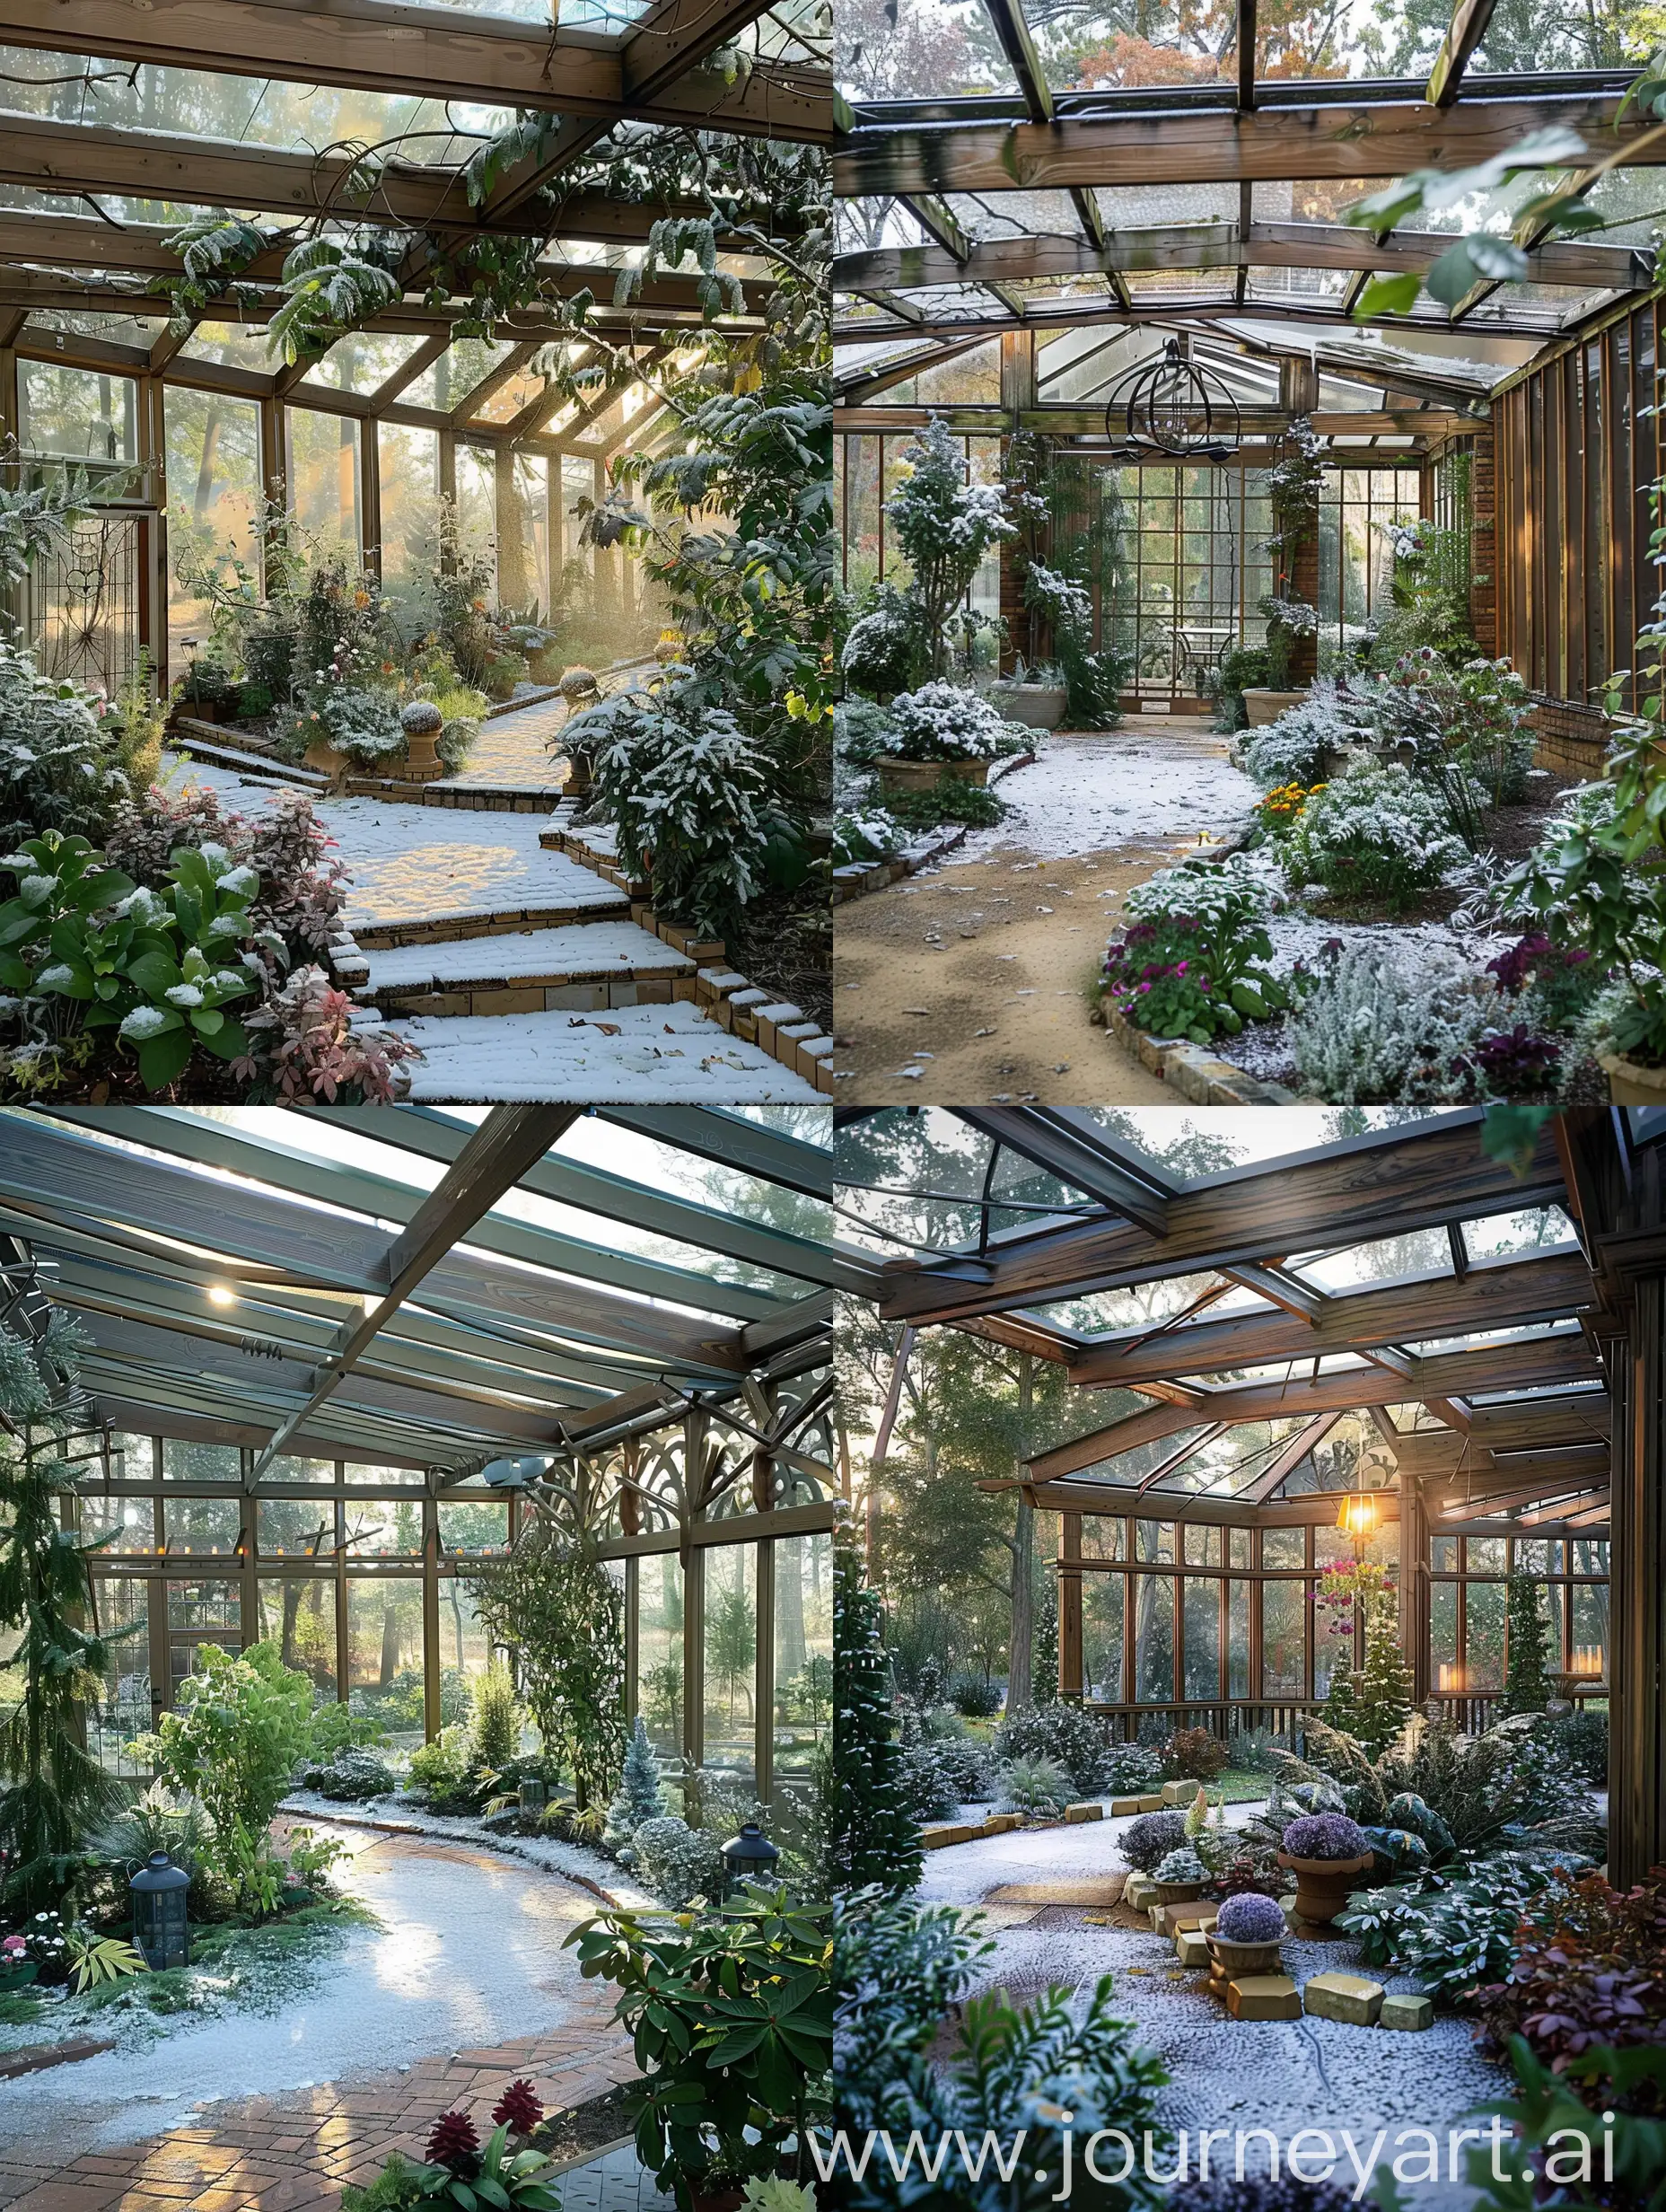 Winter-Garden-Scene-with-Snowy-Trees-and-Path